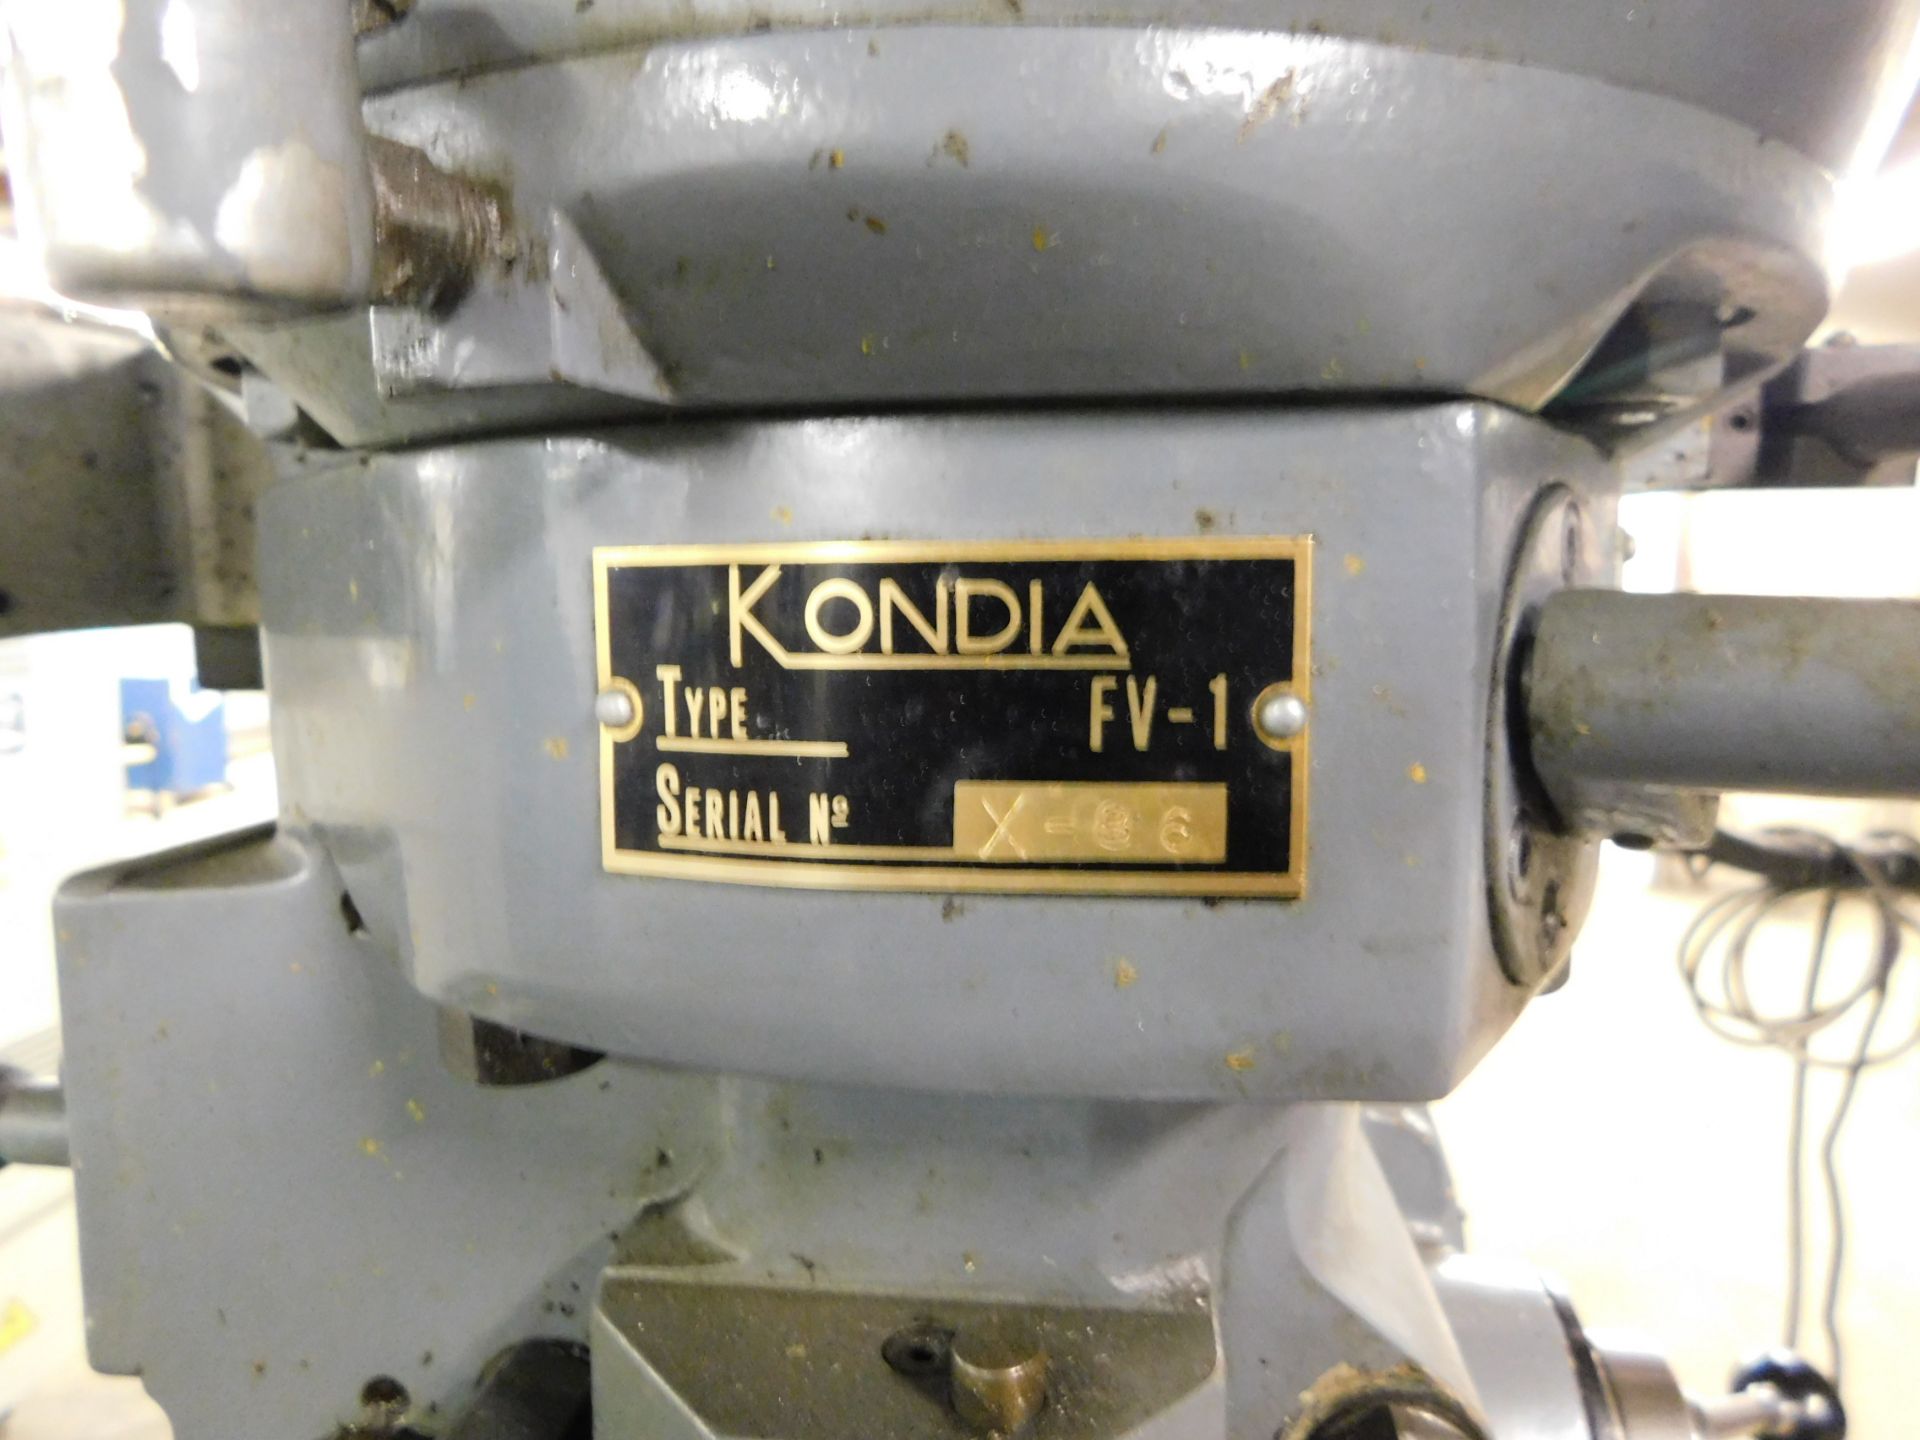 Clausing Kondia FV-1 Variable Speed Vertical Mill SN X-86, Servo Table Powerfeed, 9" x 48" Table, - Image 13 of 15